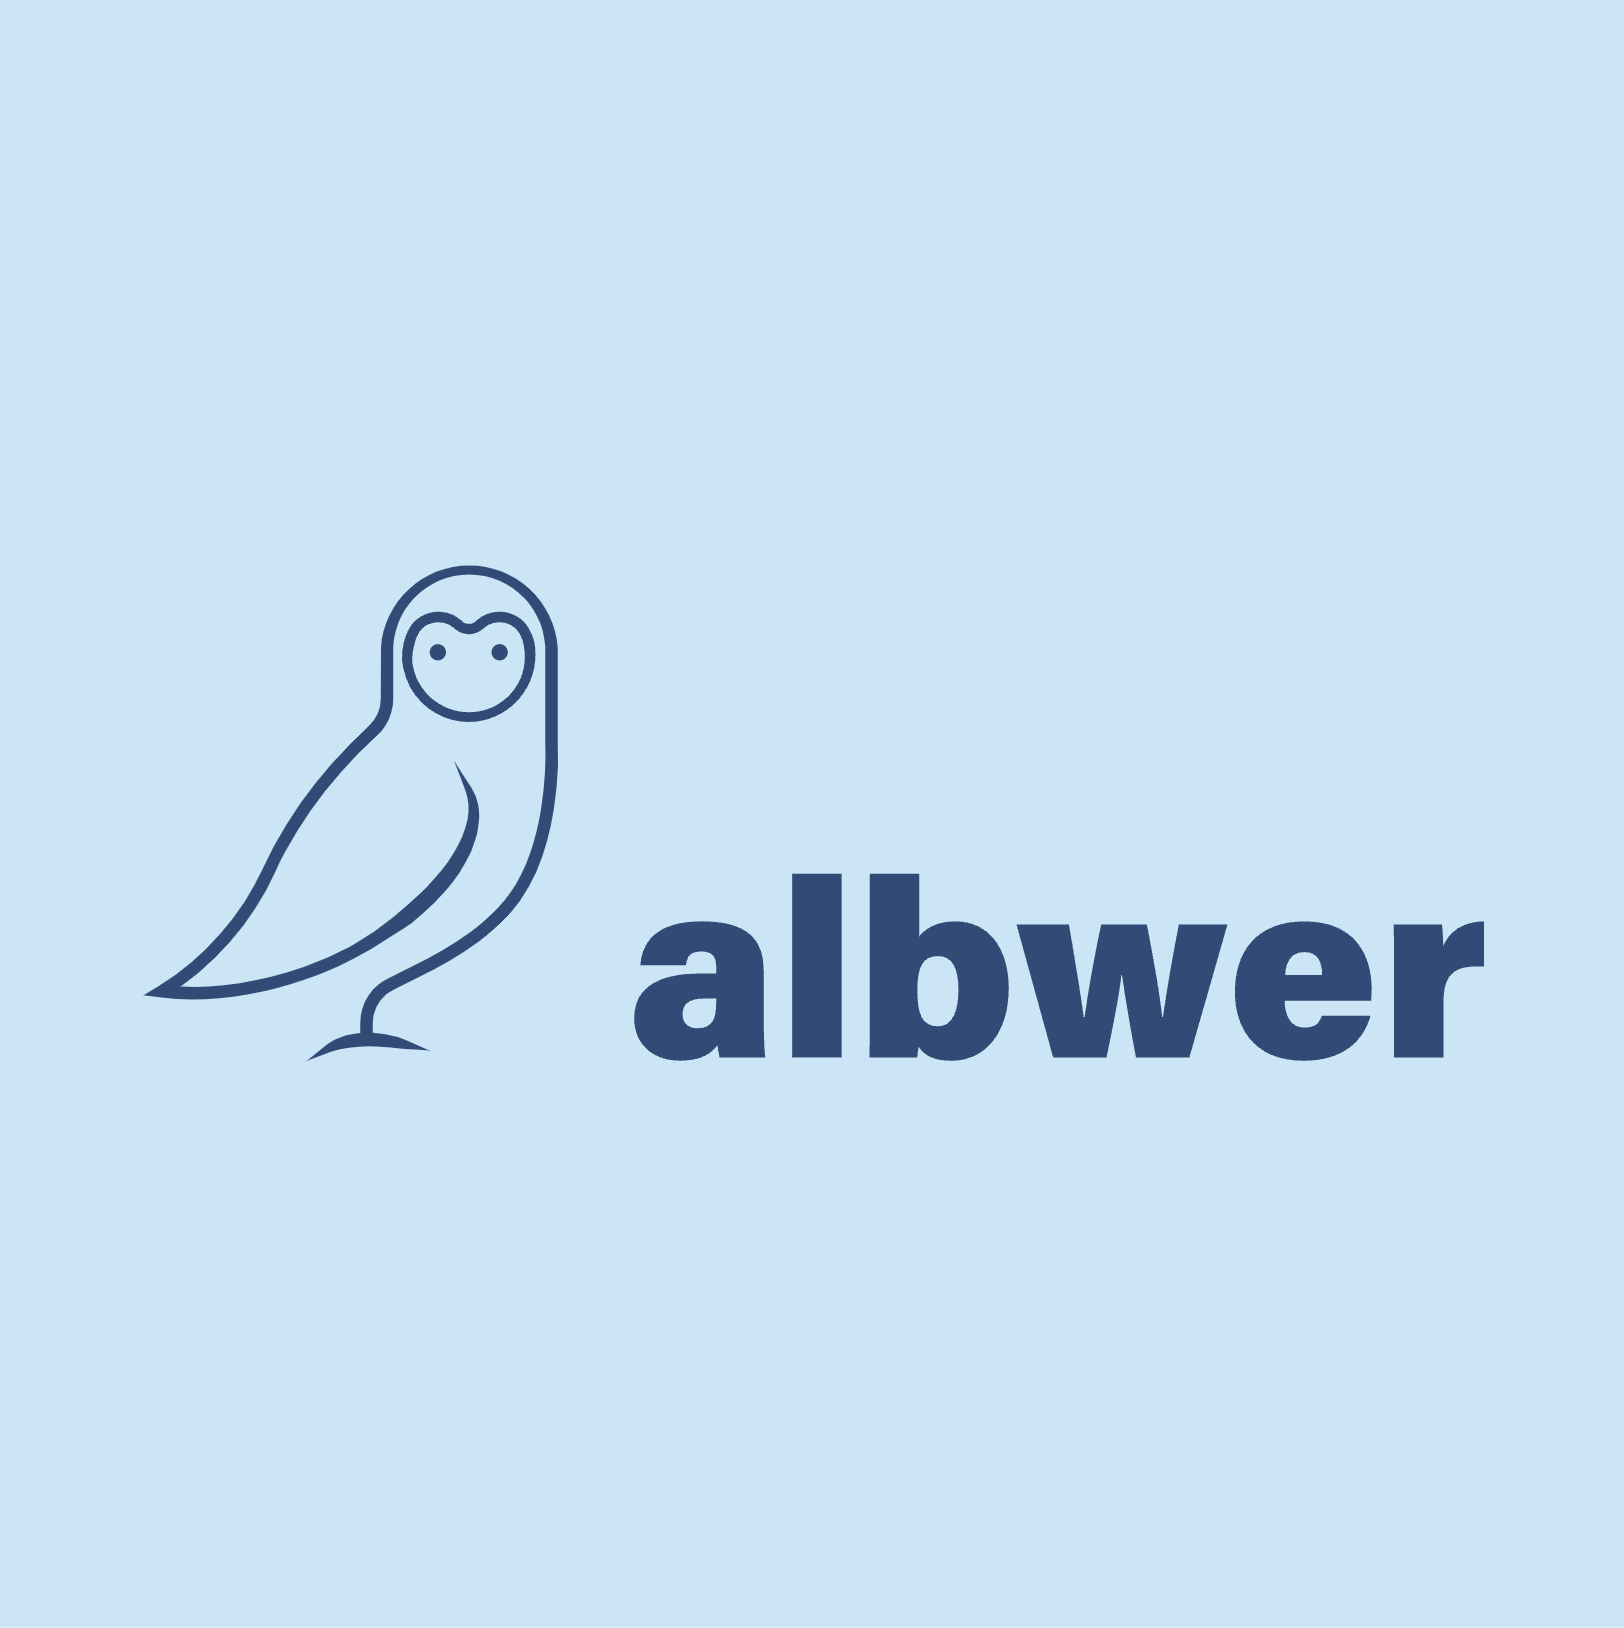 Launching my side project Albwer